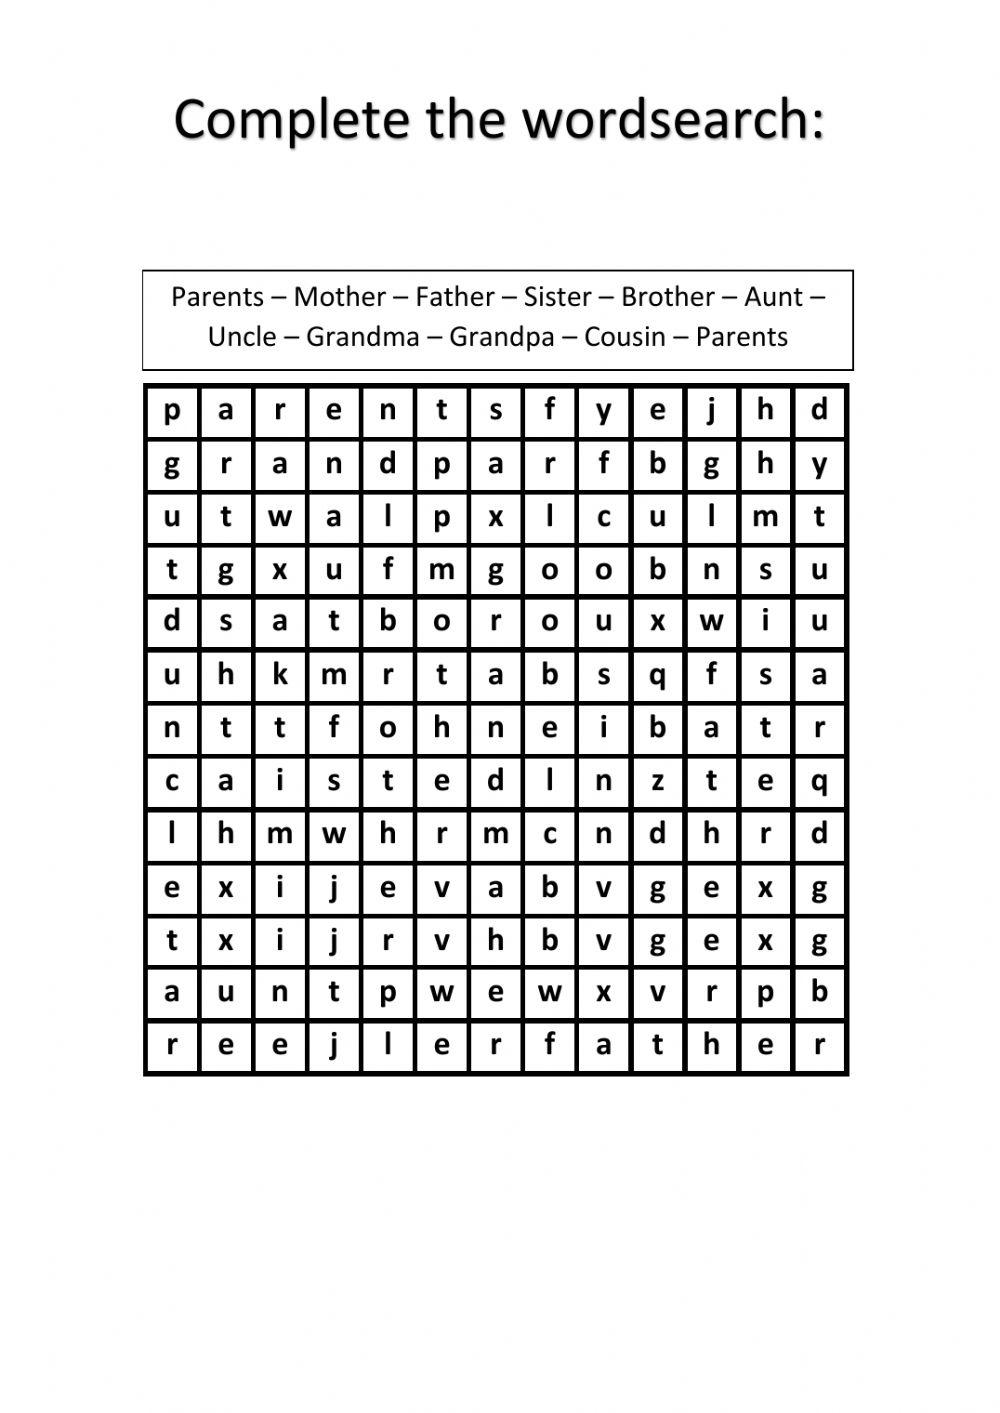 Family Wordsearch